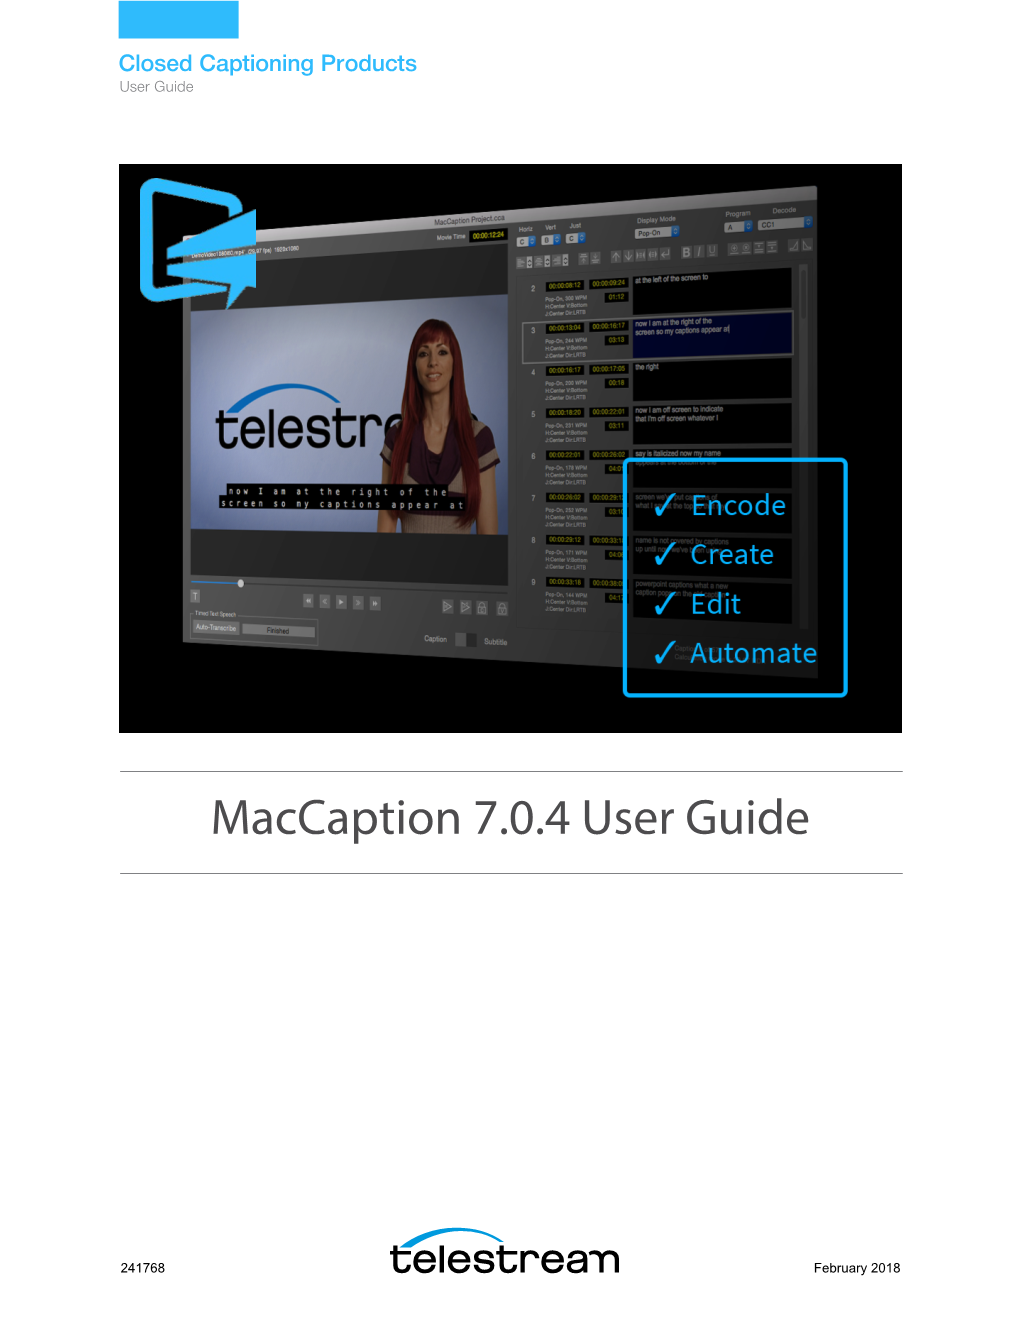 Maccaption 7.0.4 User Guide